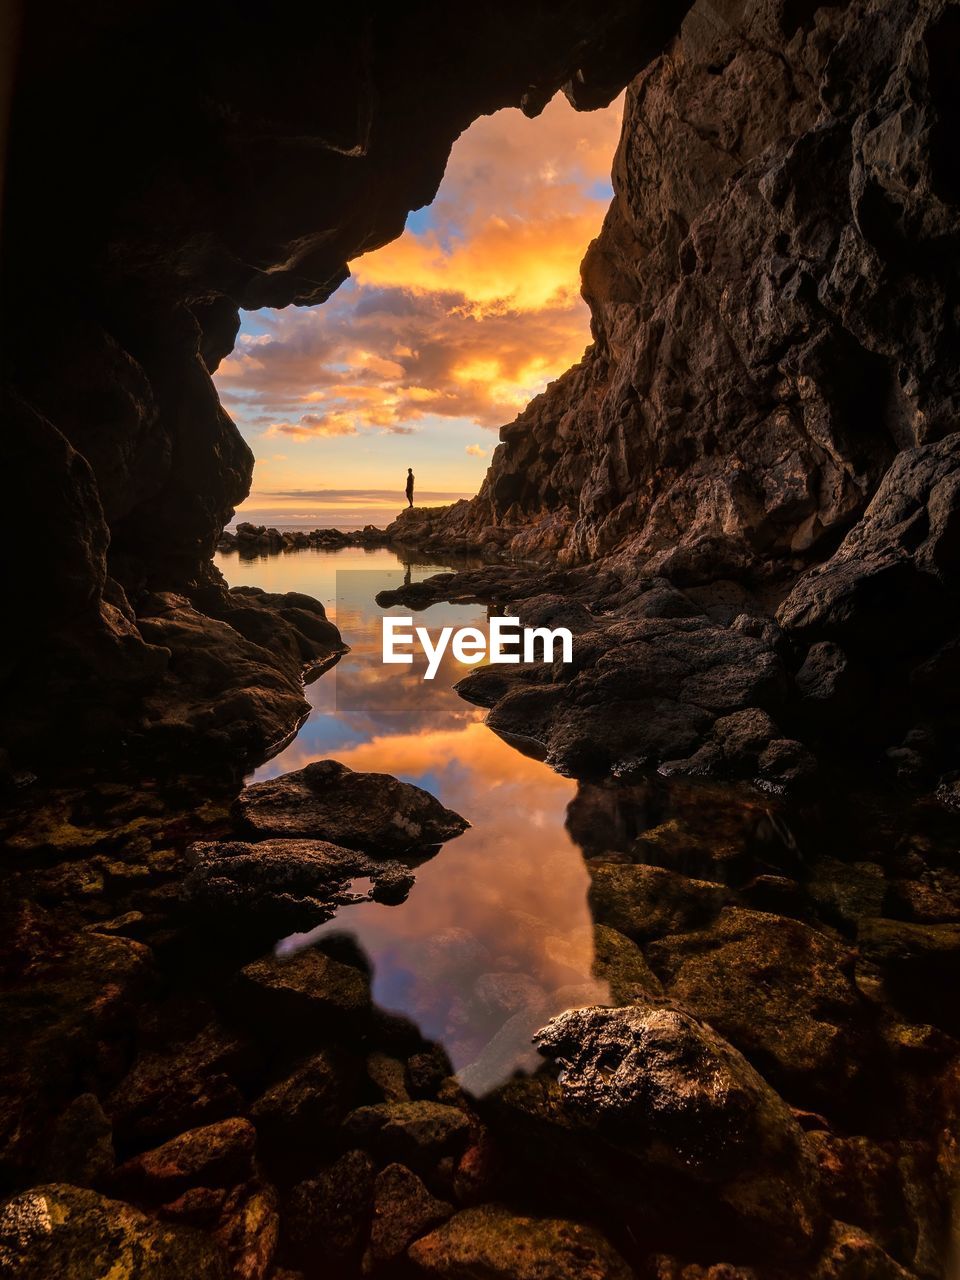 Sea seen through cave during sunset